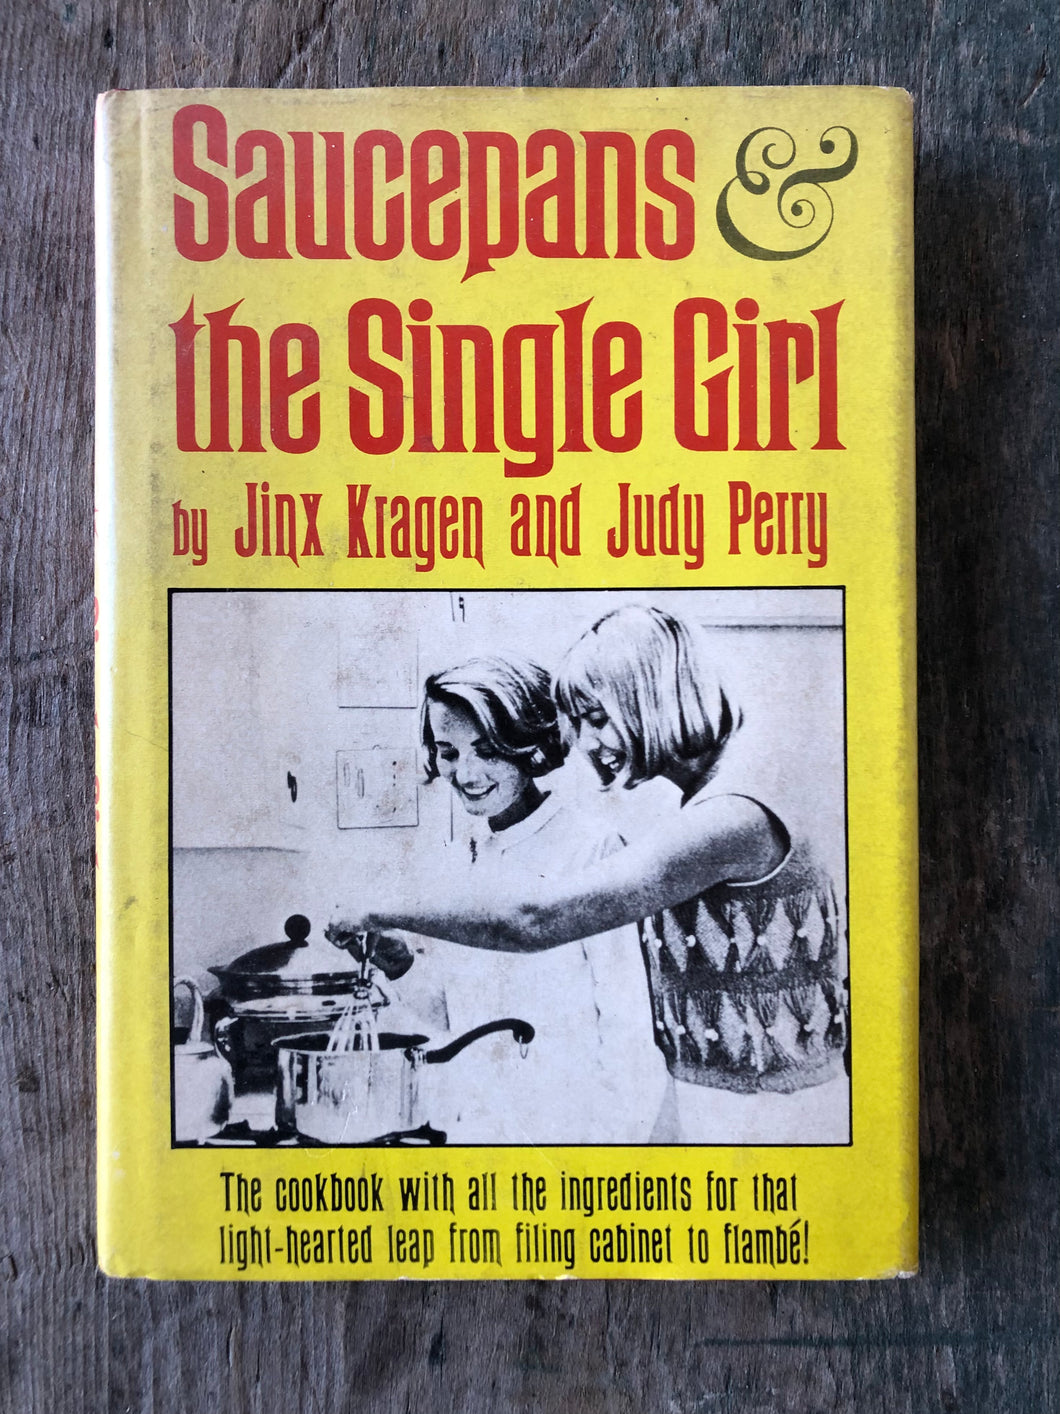 Saucepans and the Single Girl by Jinx Kragen and Judy Perry